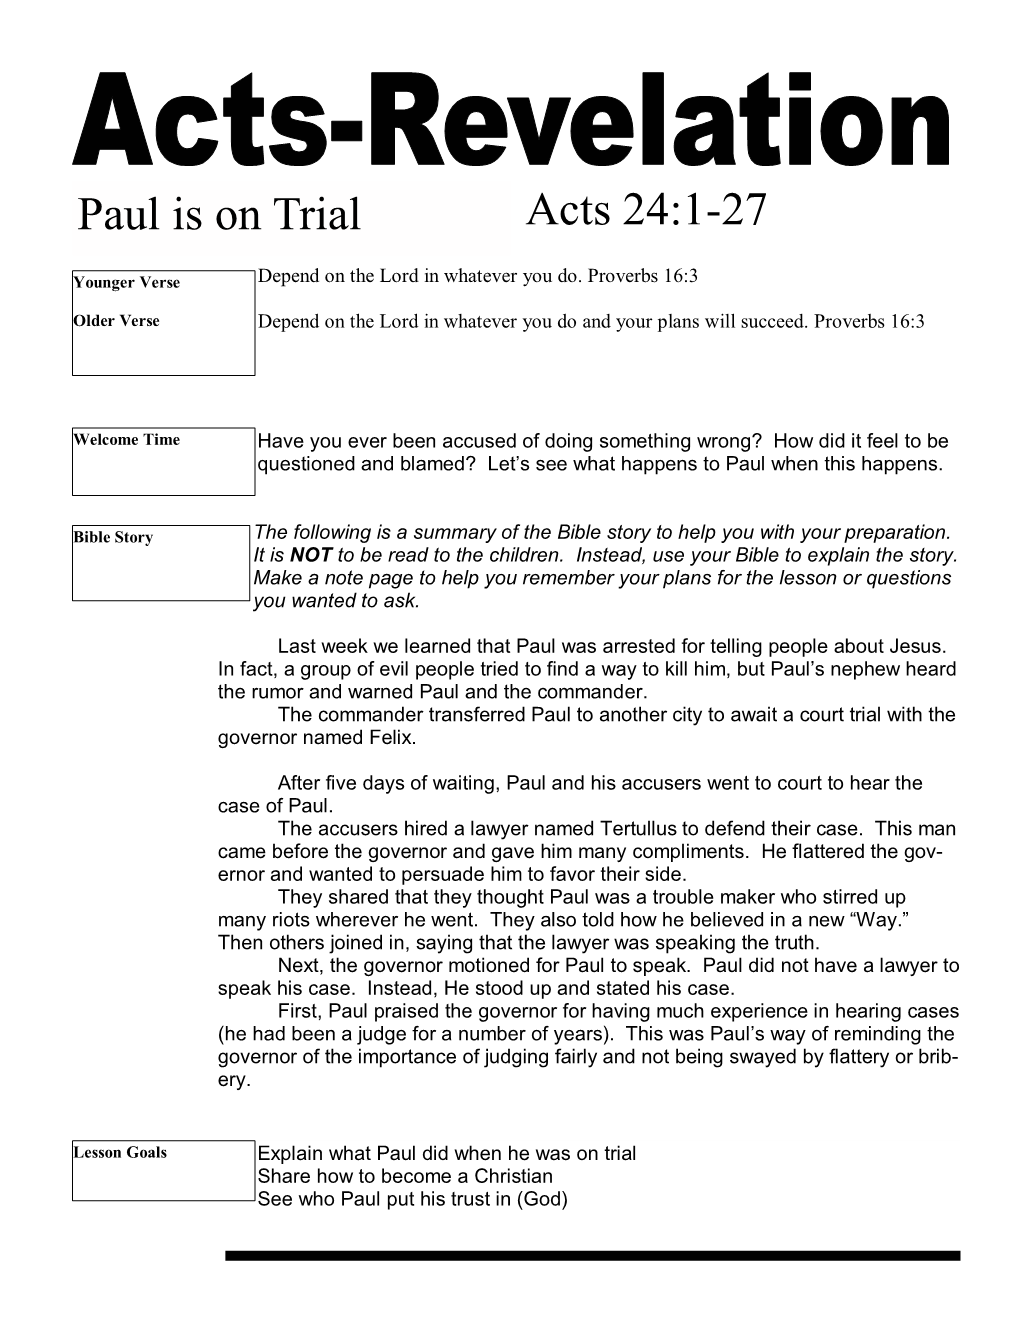 Acts 24:1-27 Paul Is on Trial